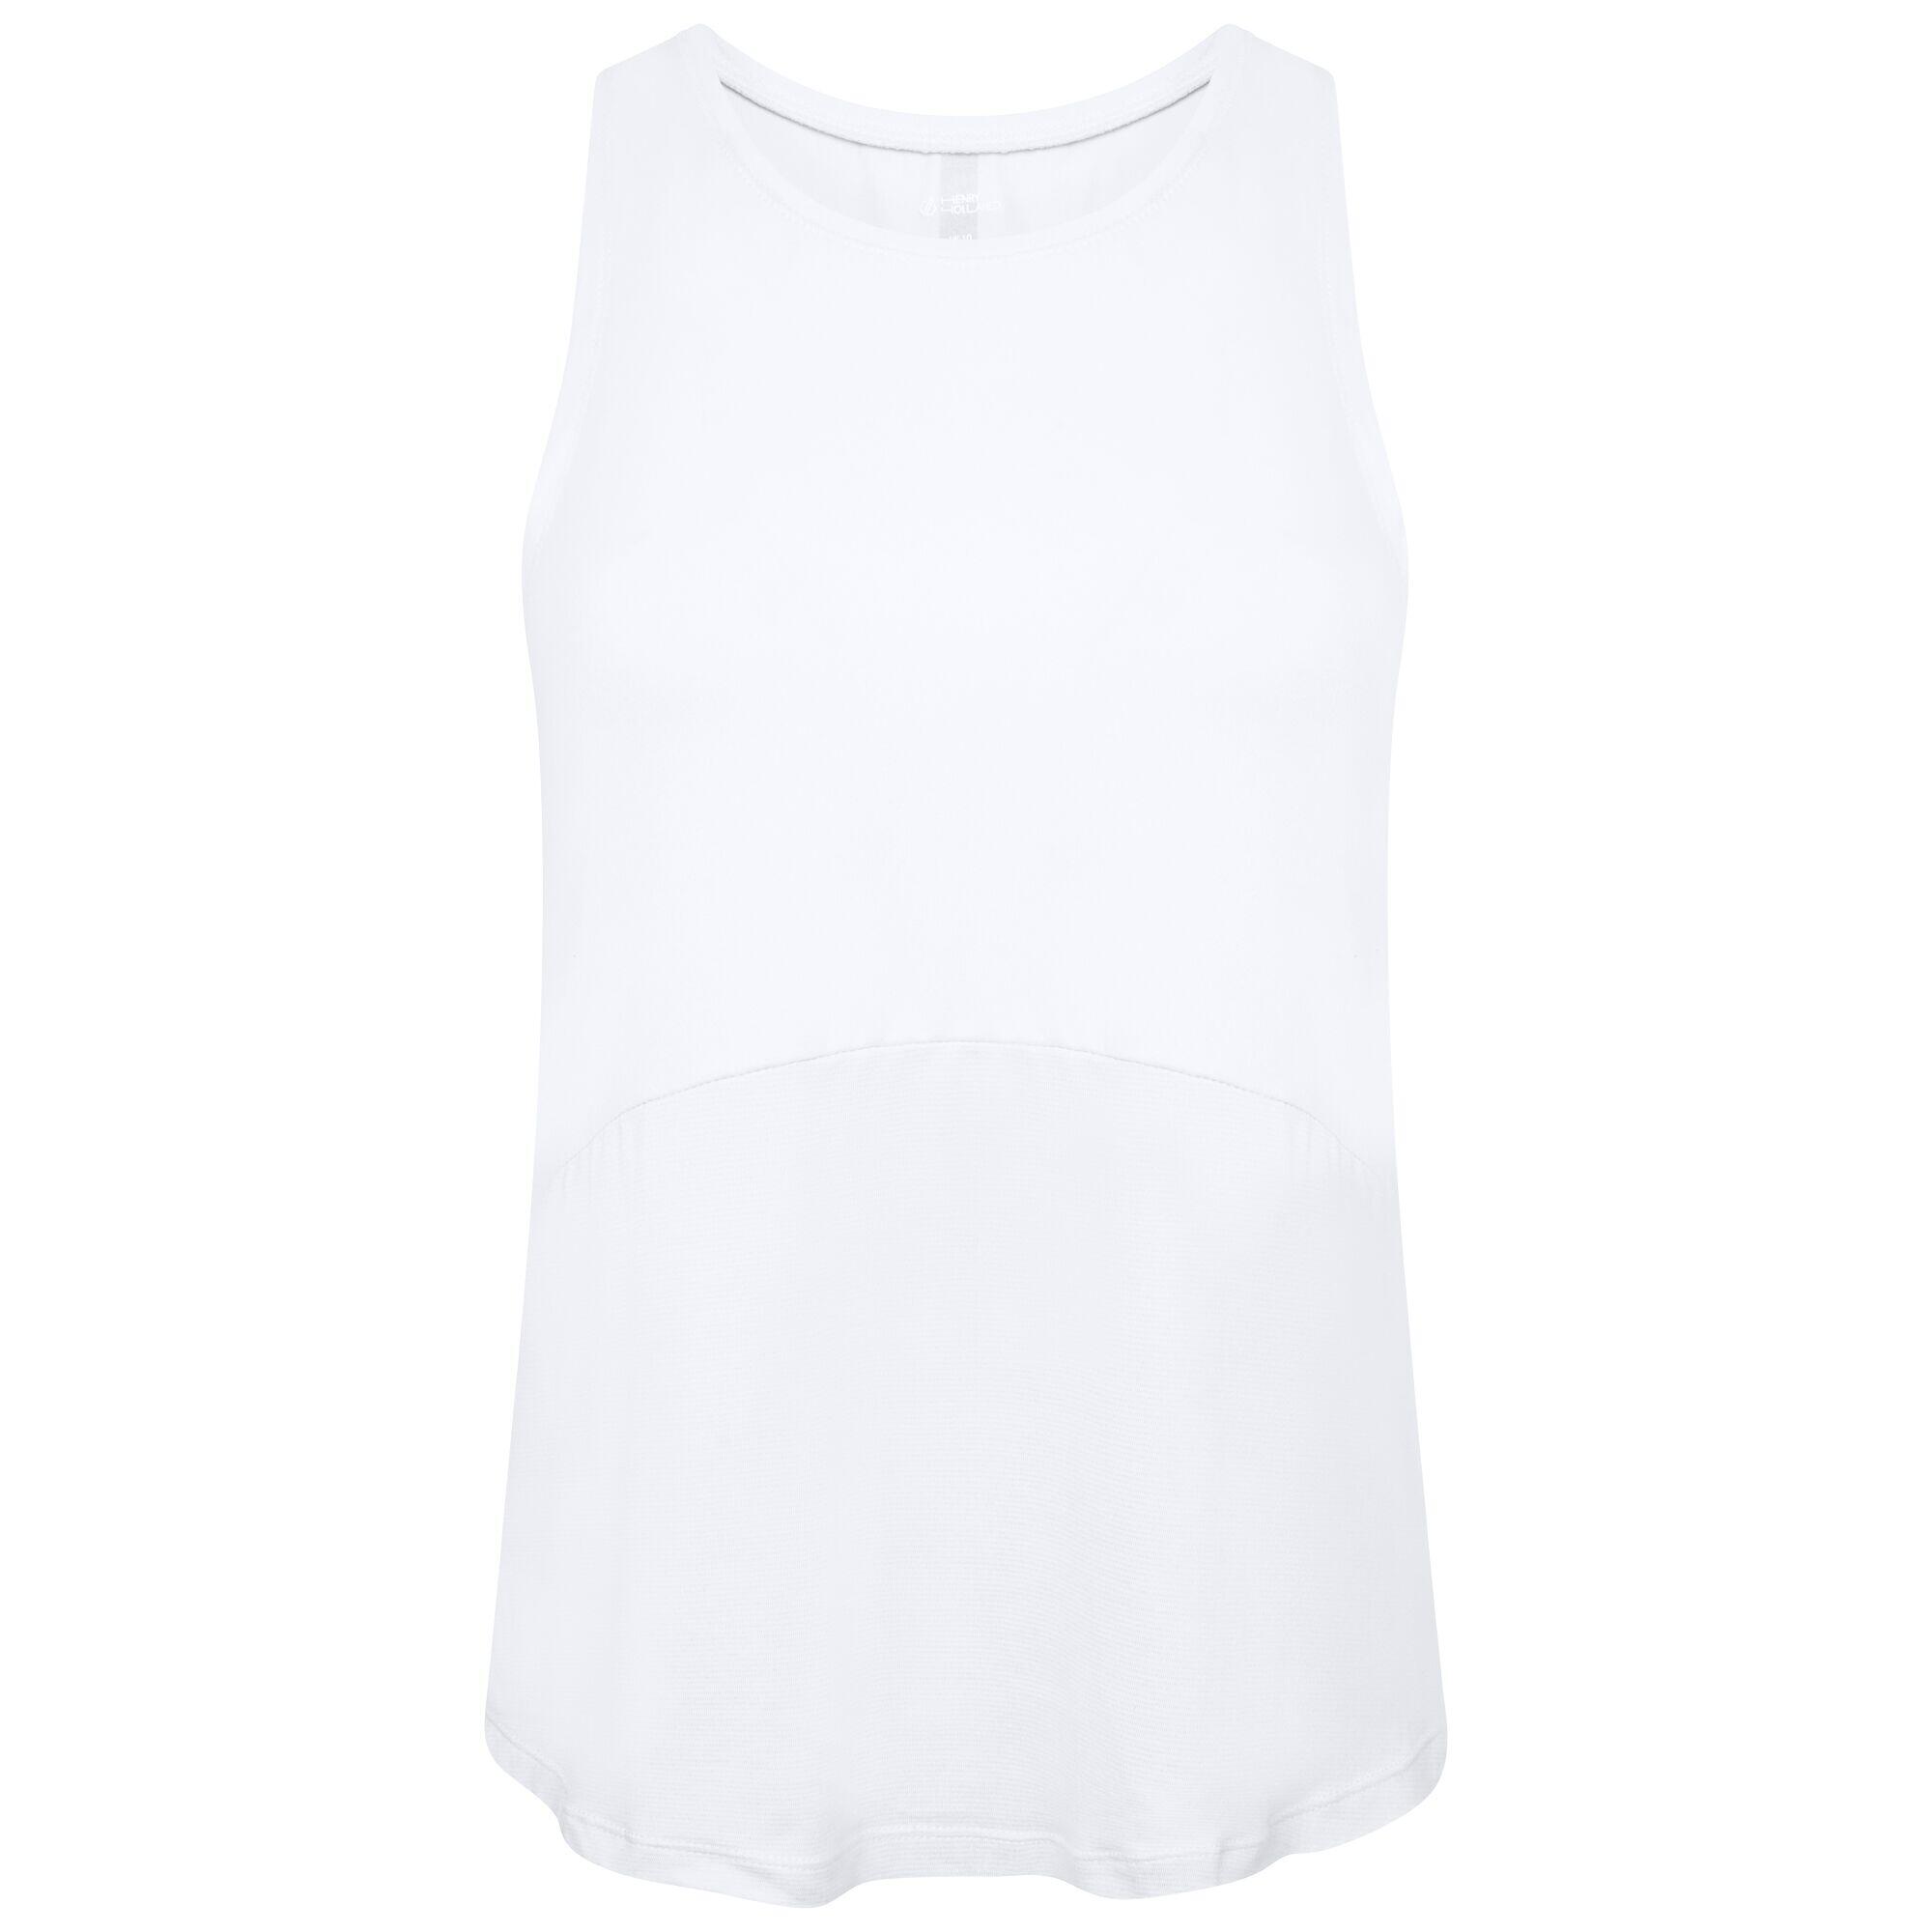 Henry Holland Cut Loose Womens Gym Vest - White 1/5